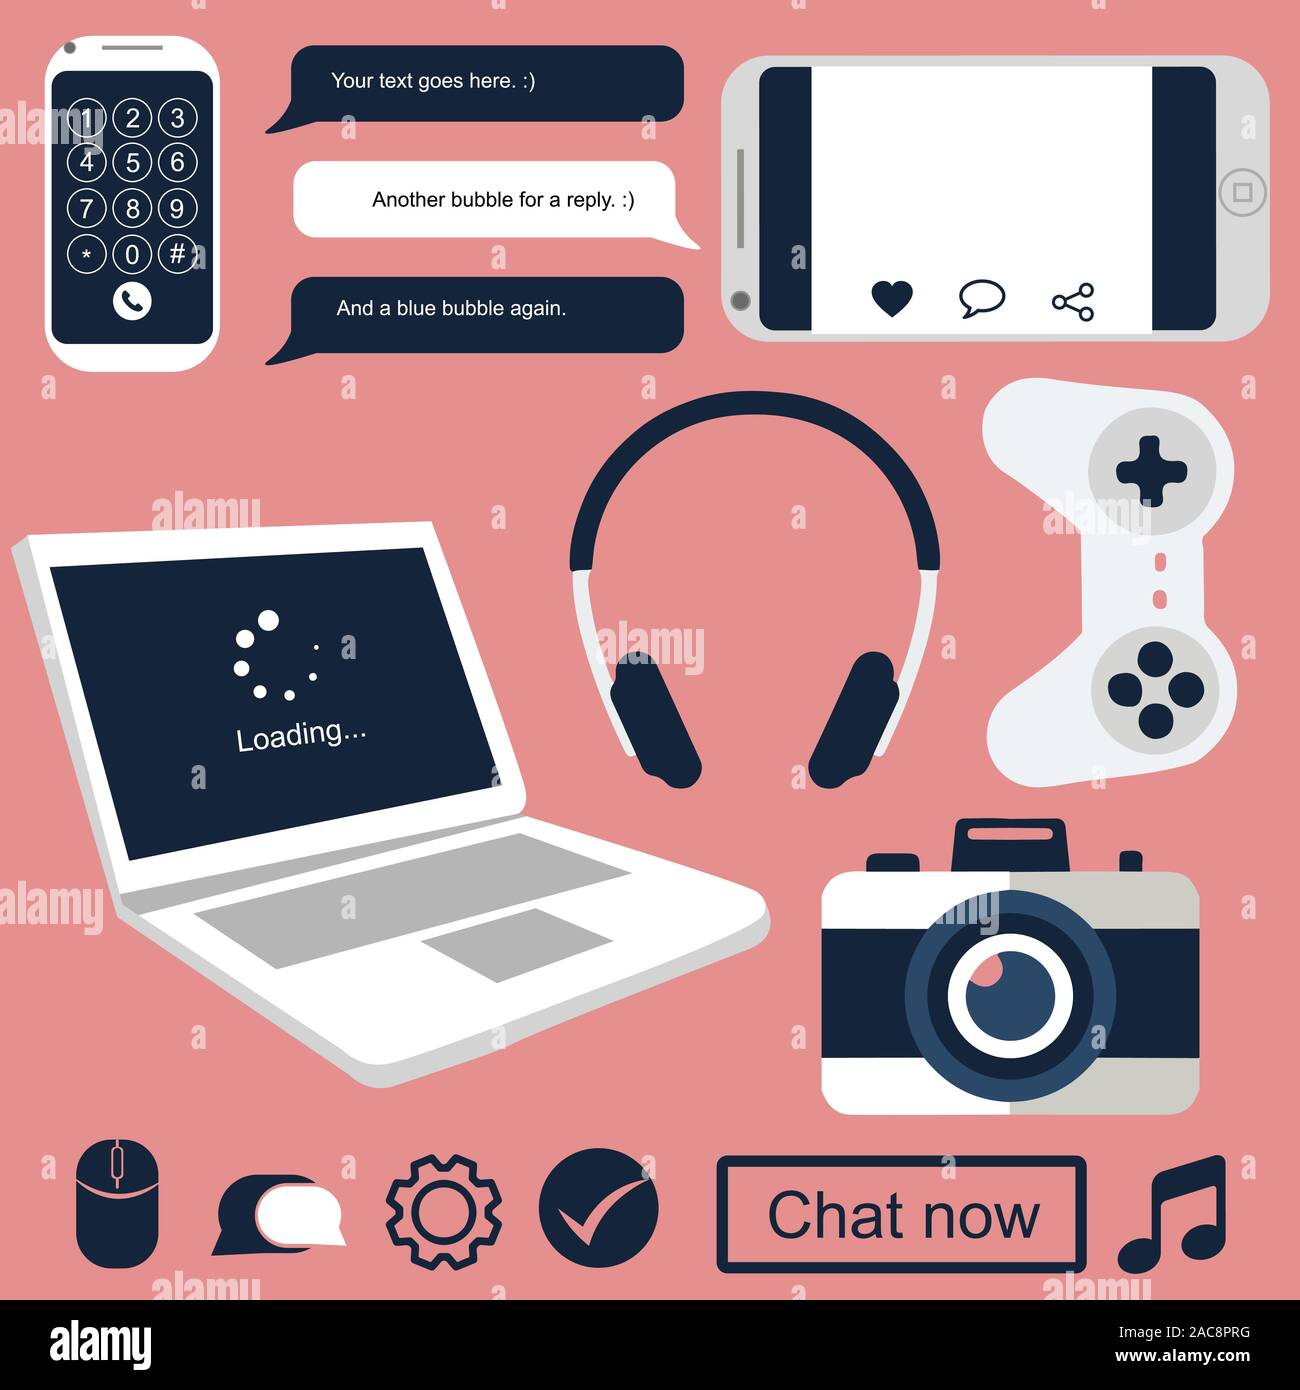 Isolated technology related gadgets for communication, social media and hobbies. Flat illustration of modern elements and icons. Stock Vector